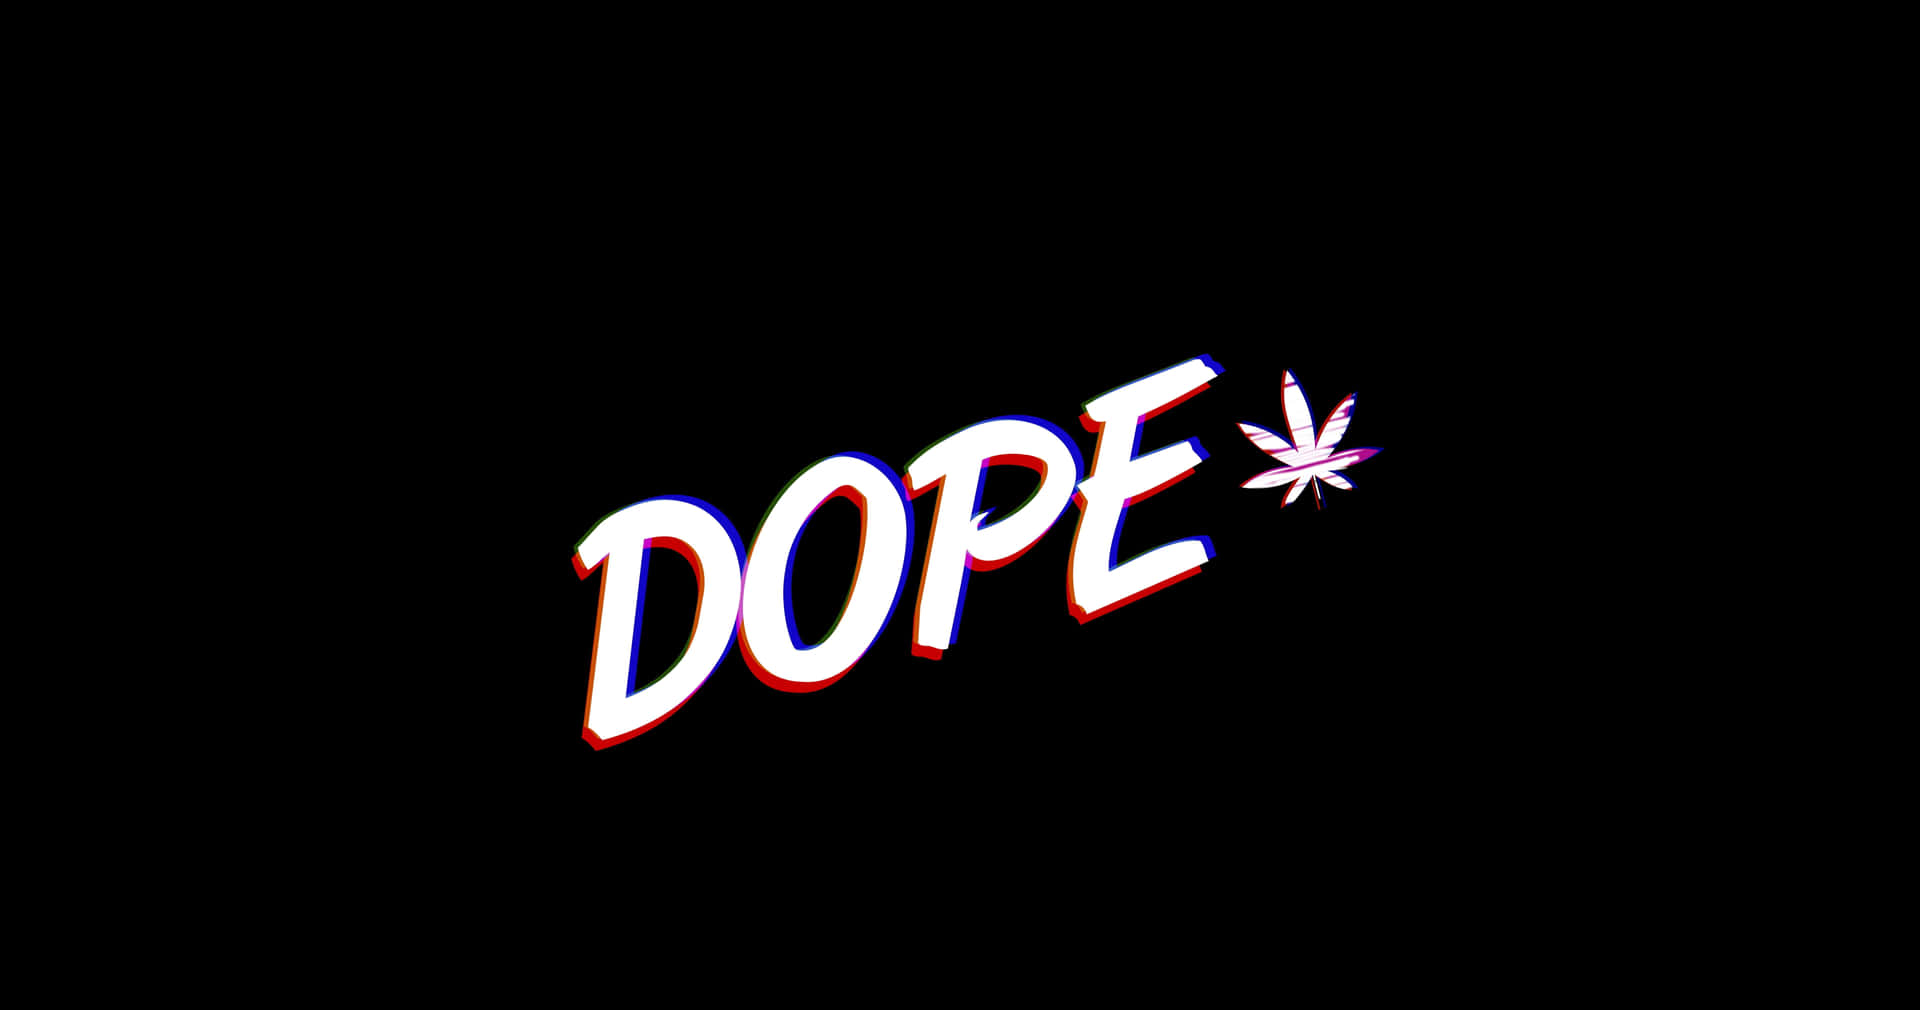 dope wallpaper backgrounds